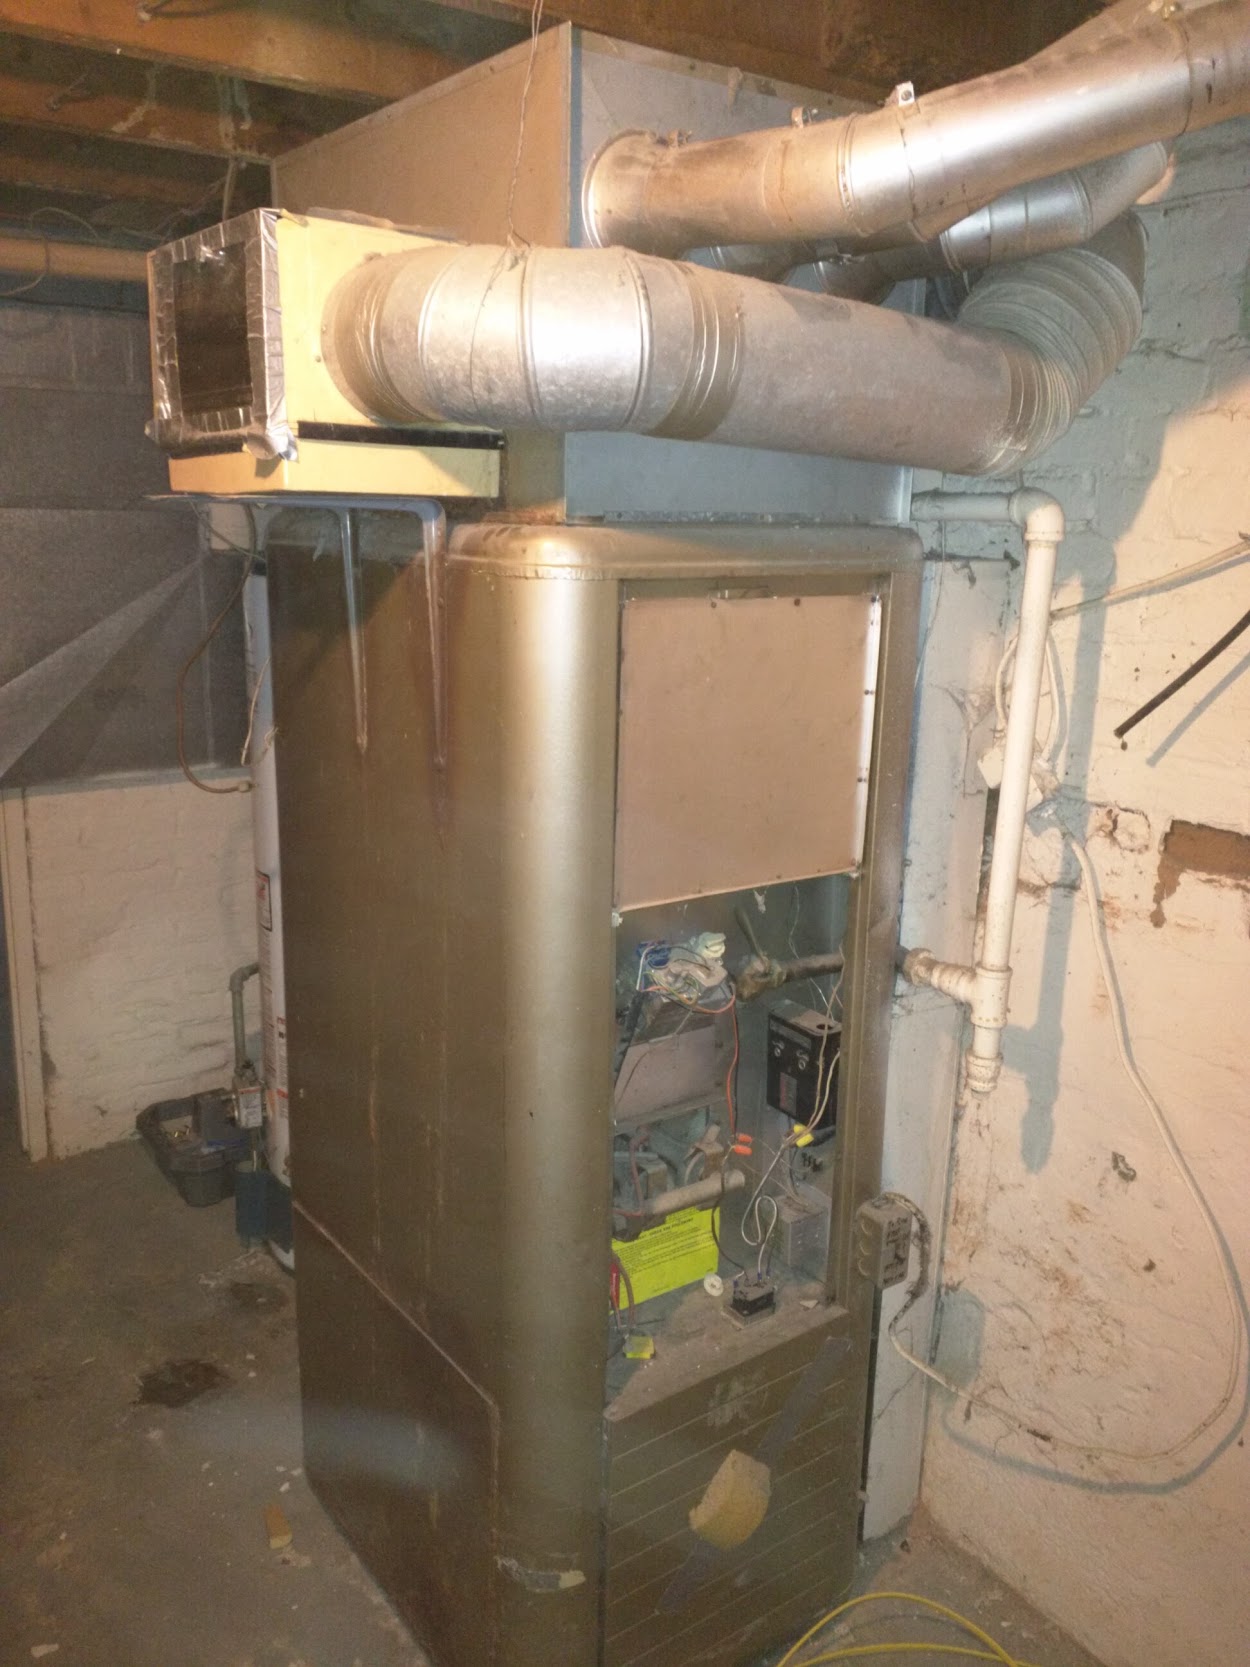 What to Look for When Considering a Used Furnace